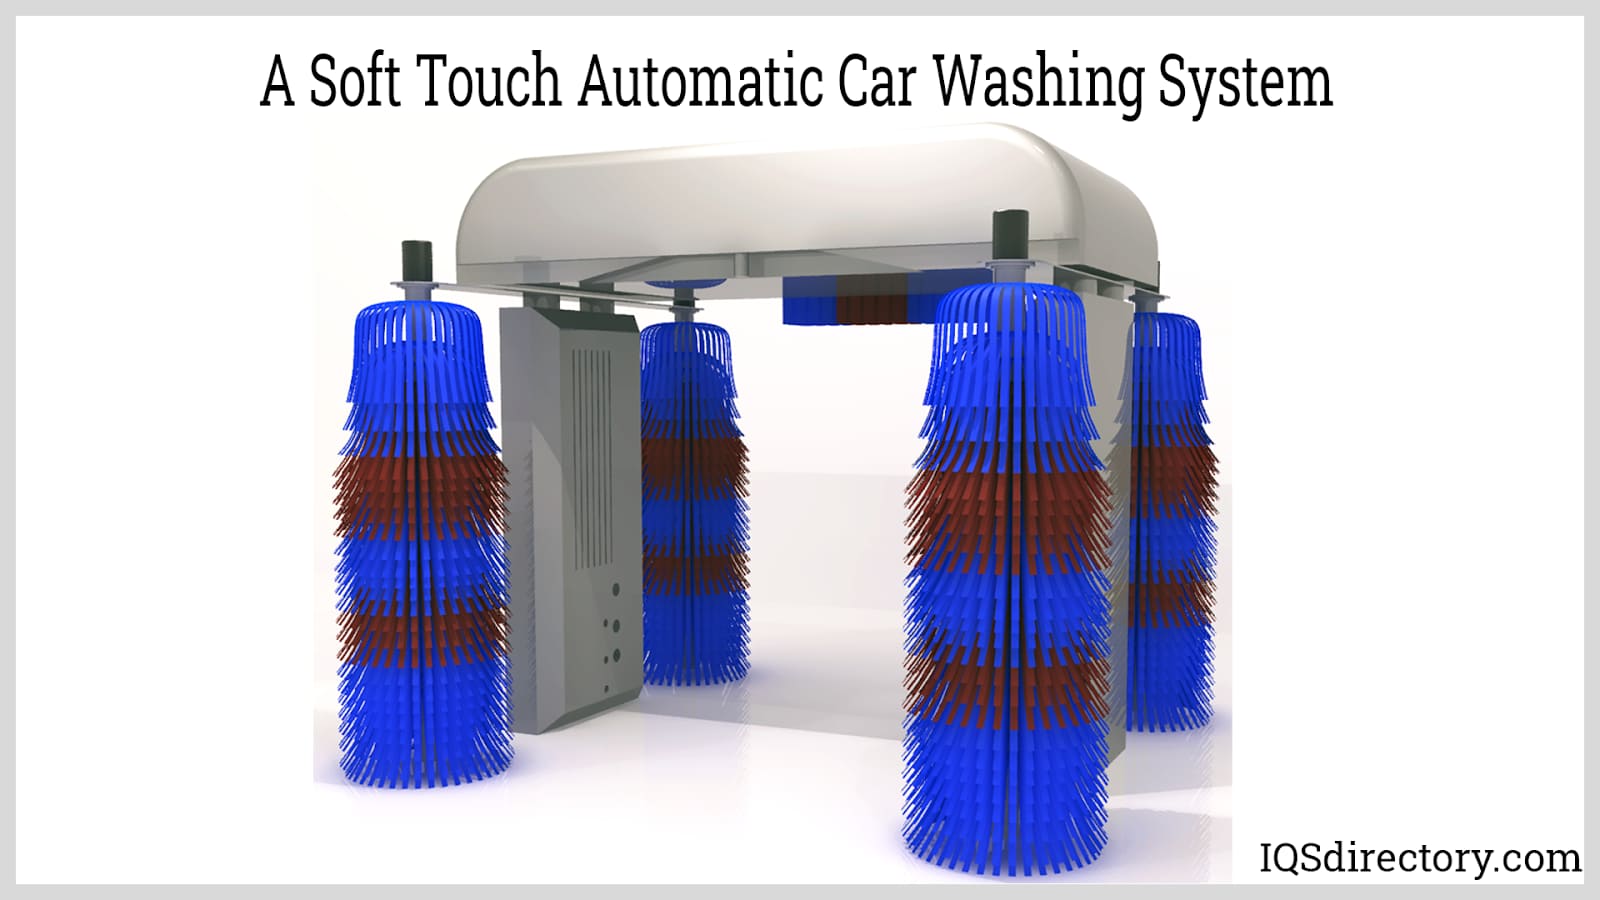 A Soft Touch Automatic Car Washing System